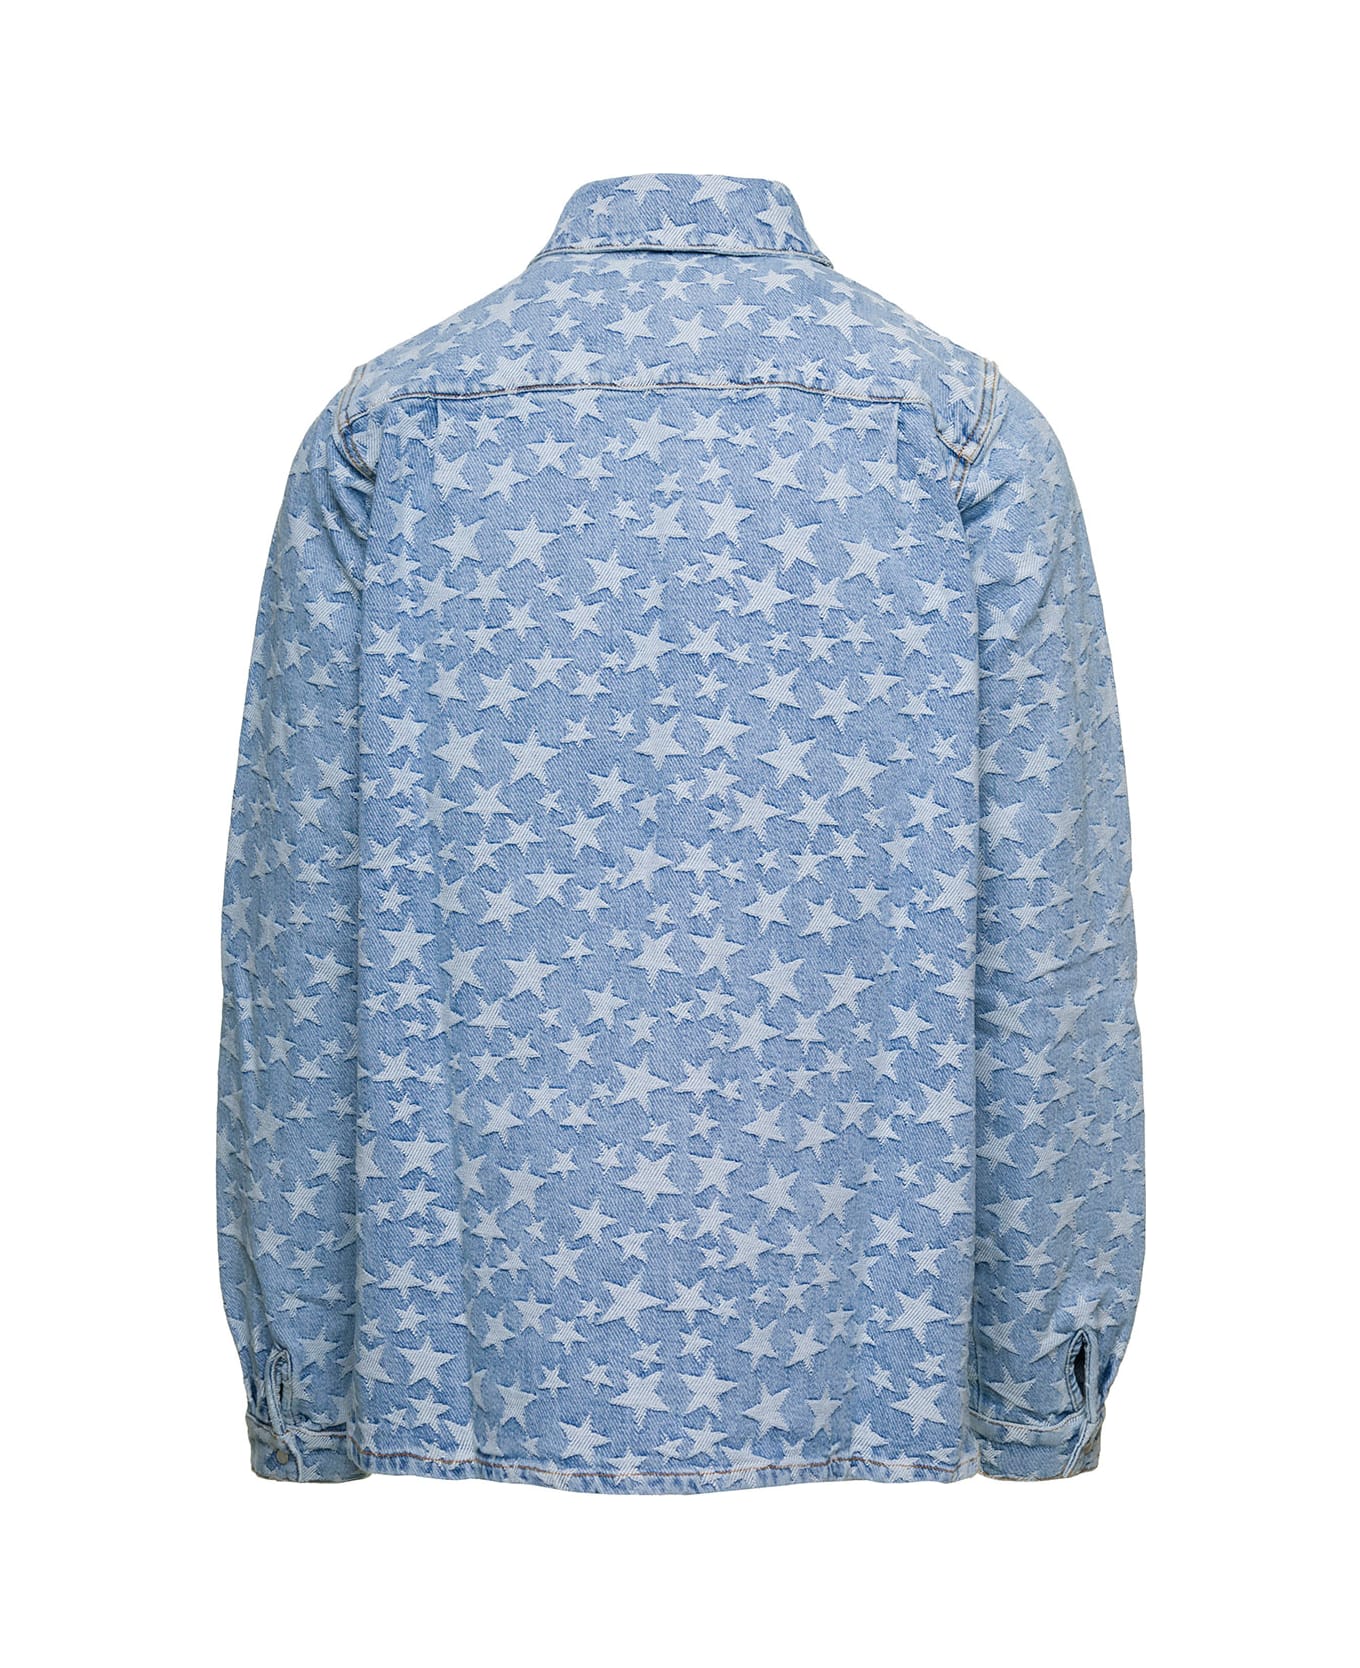 ERL Light Blue Long Sleeve Shirt With All-over Star Print In Cotton Denim - Light blue シャツ